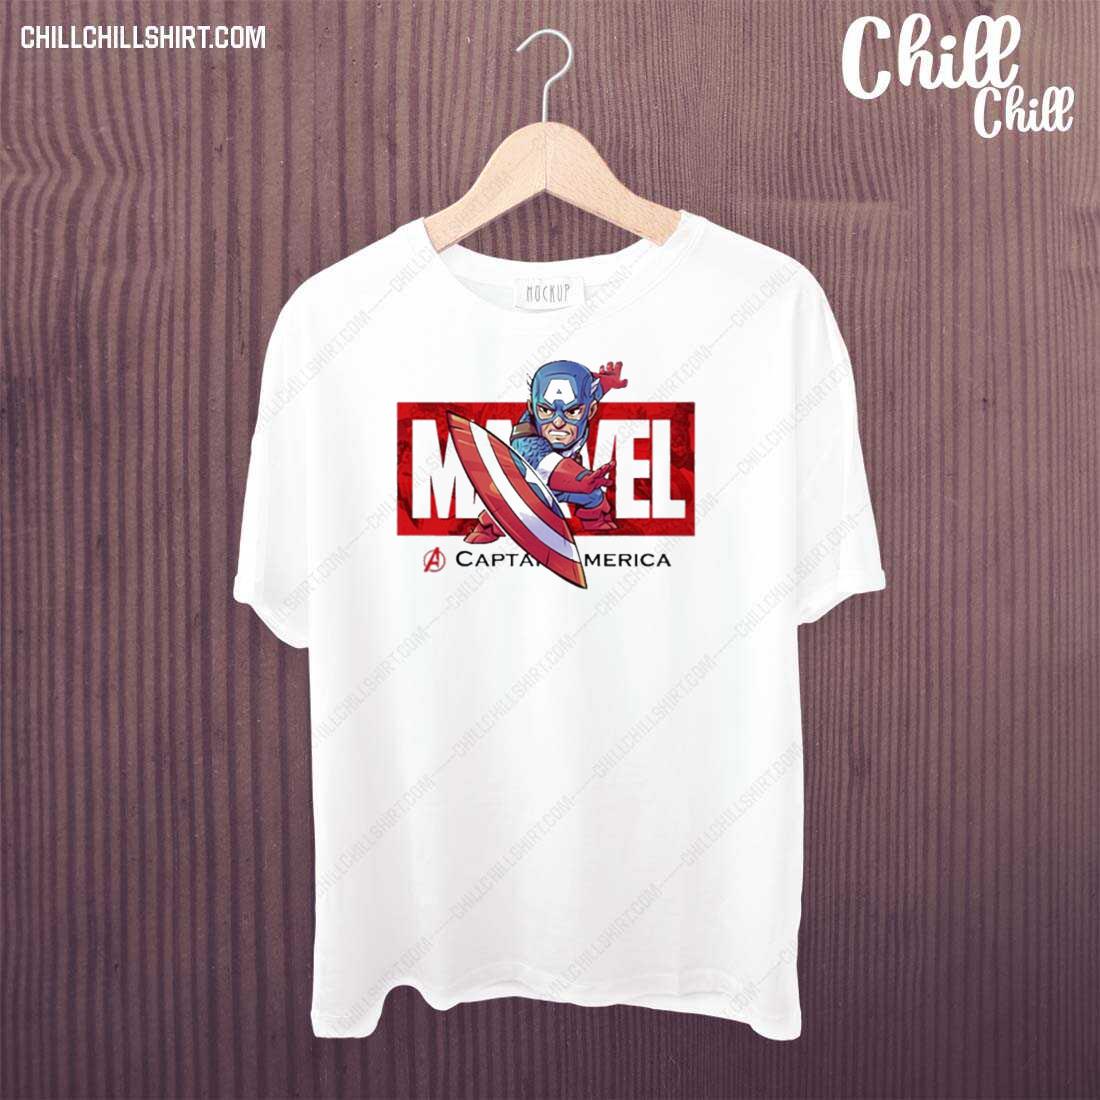 Nice red Captain America T-shirt